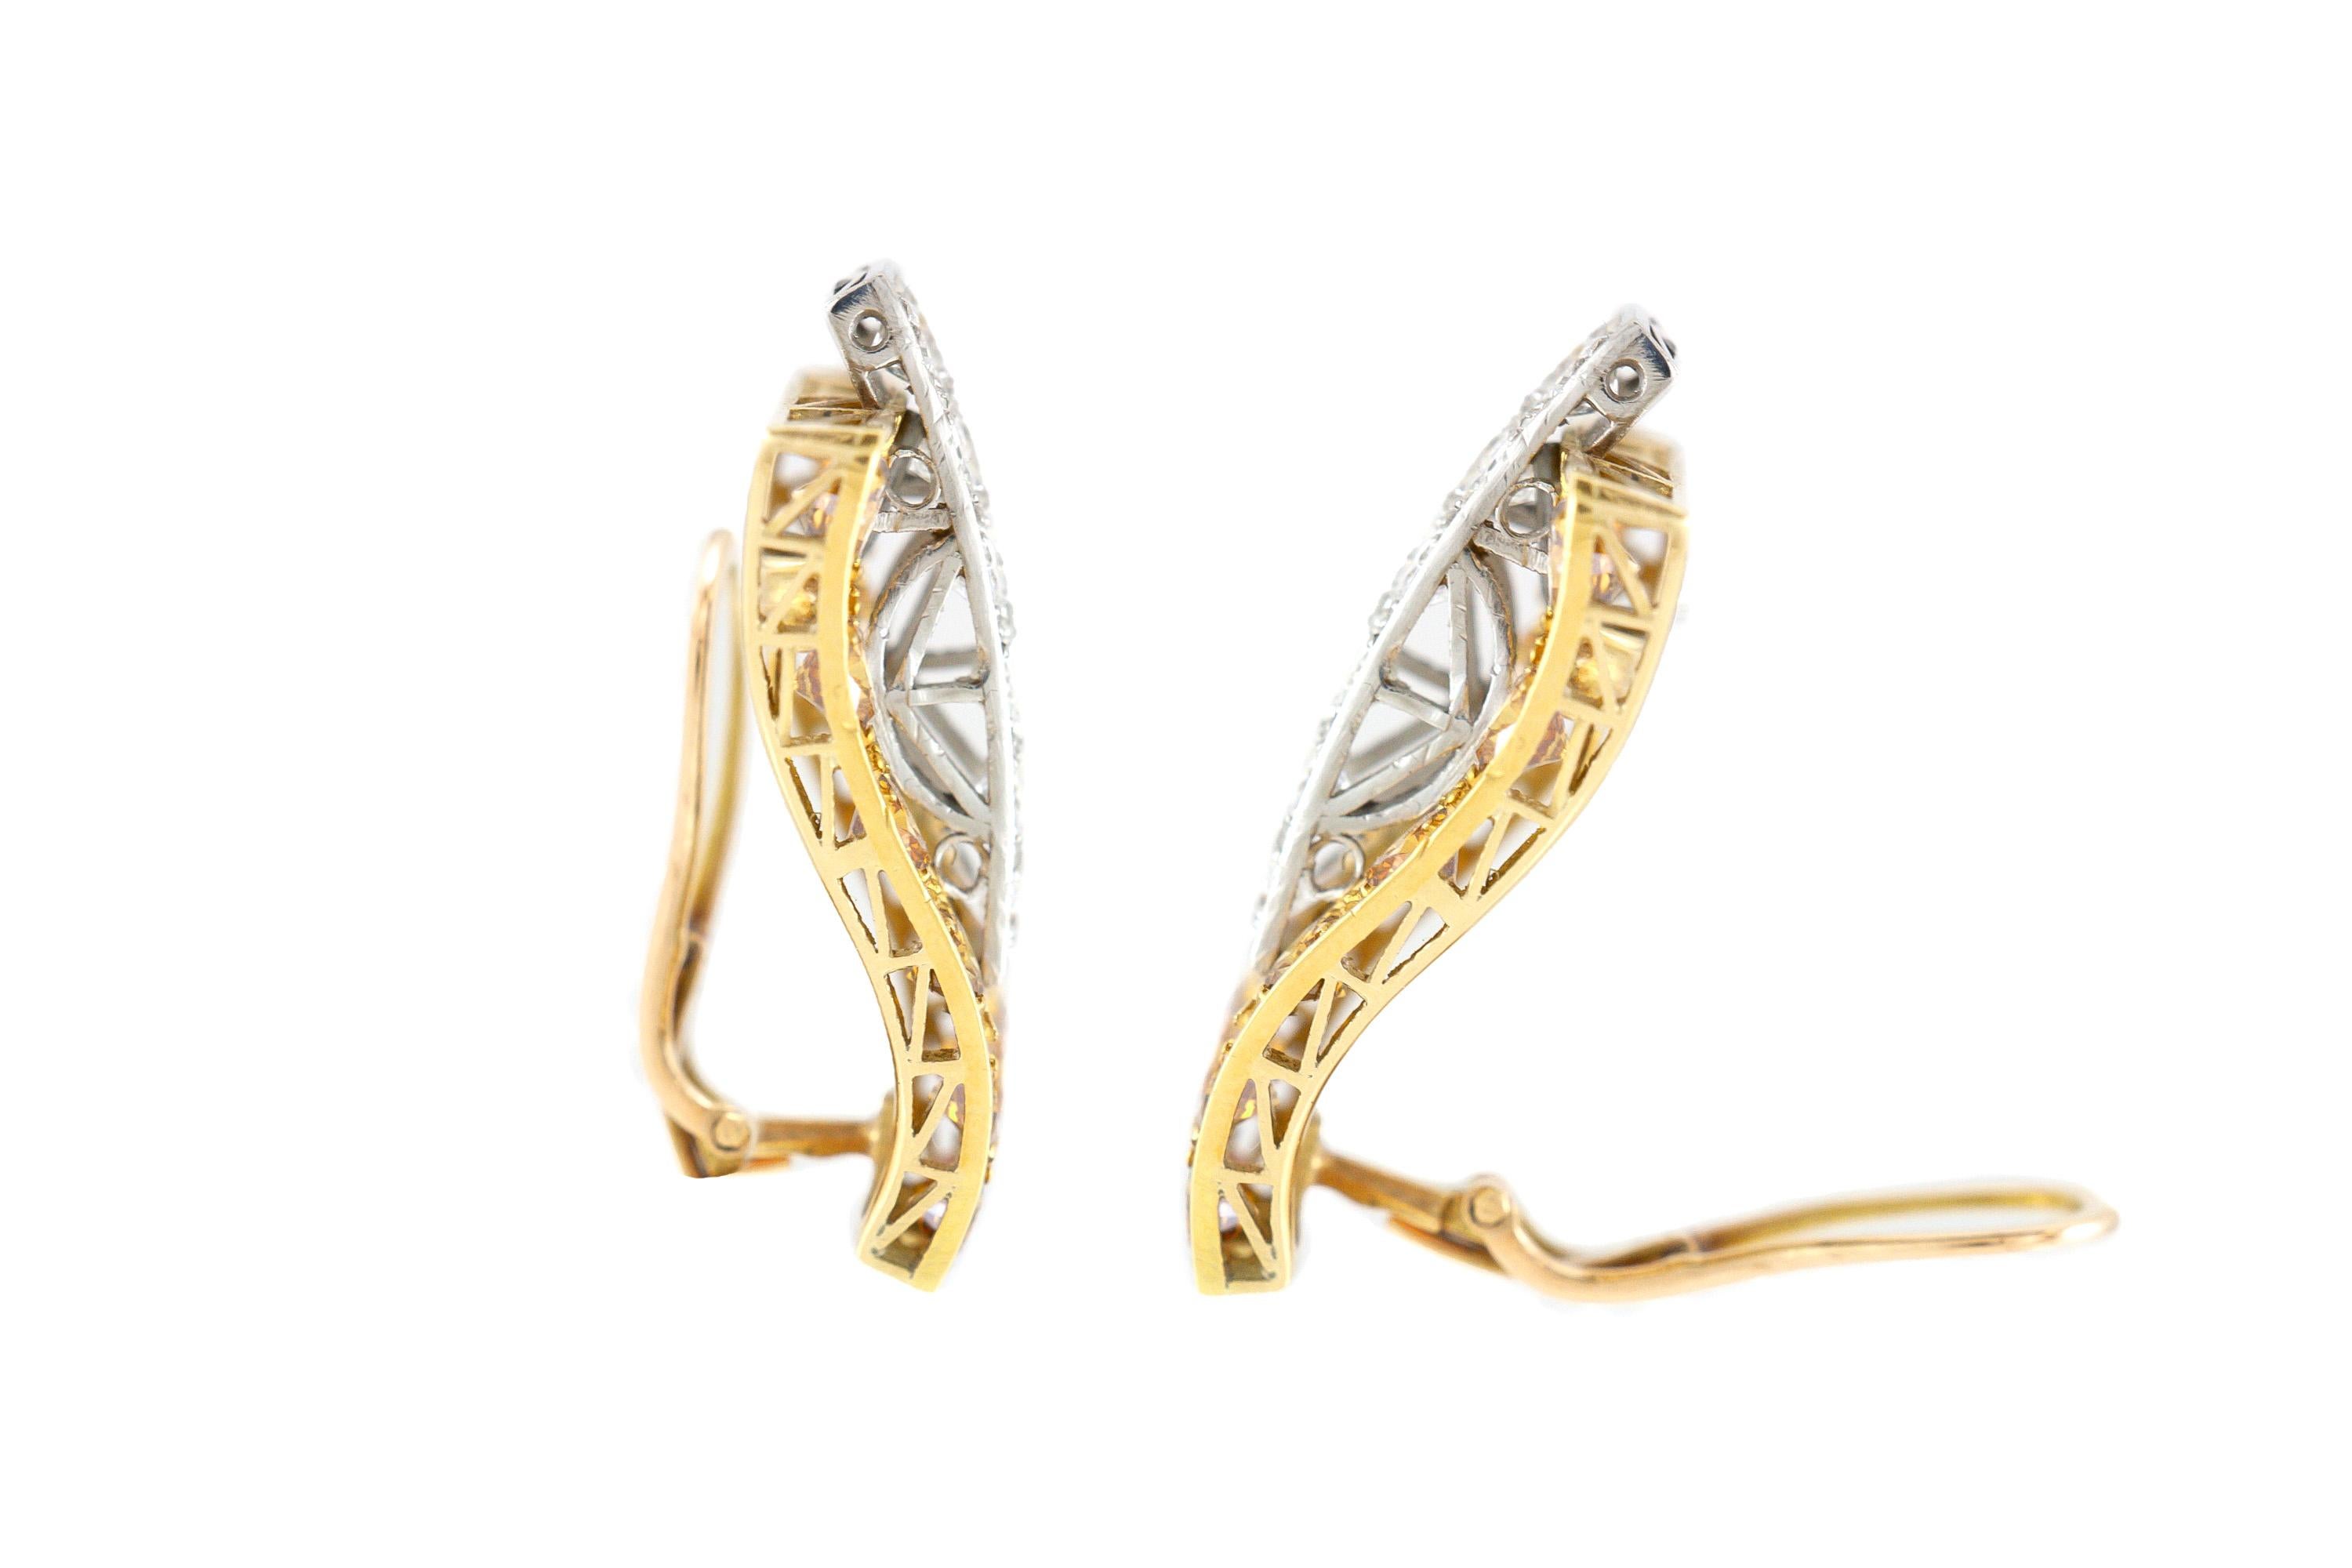 The earrings are finely crafted in 14k yellow gold with diamonds weighing approximately total of 5.00 carat. 
Circa 1980.

